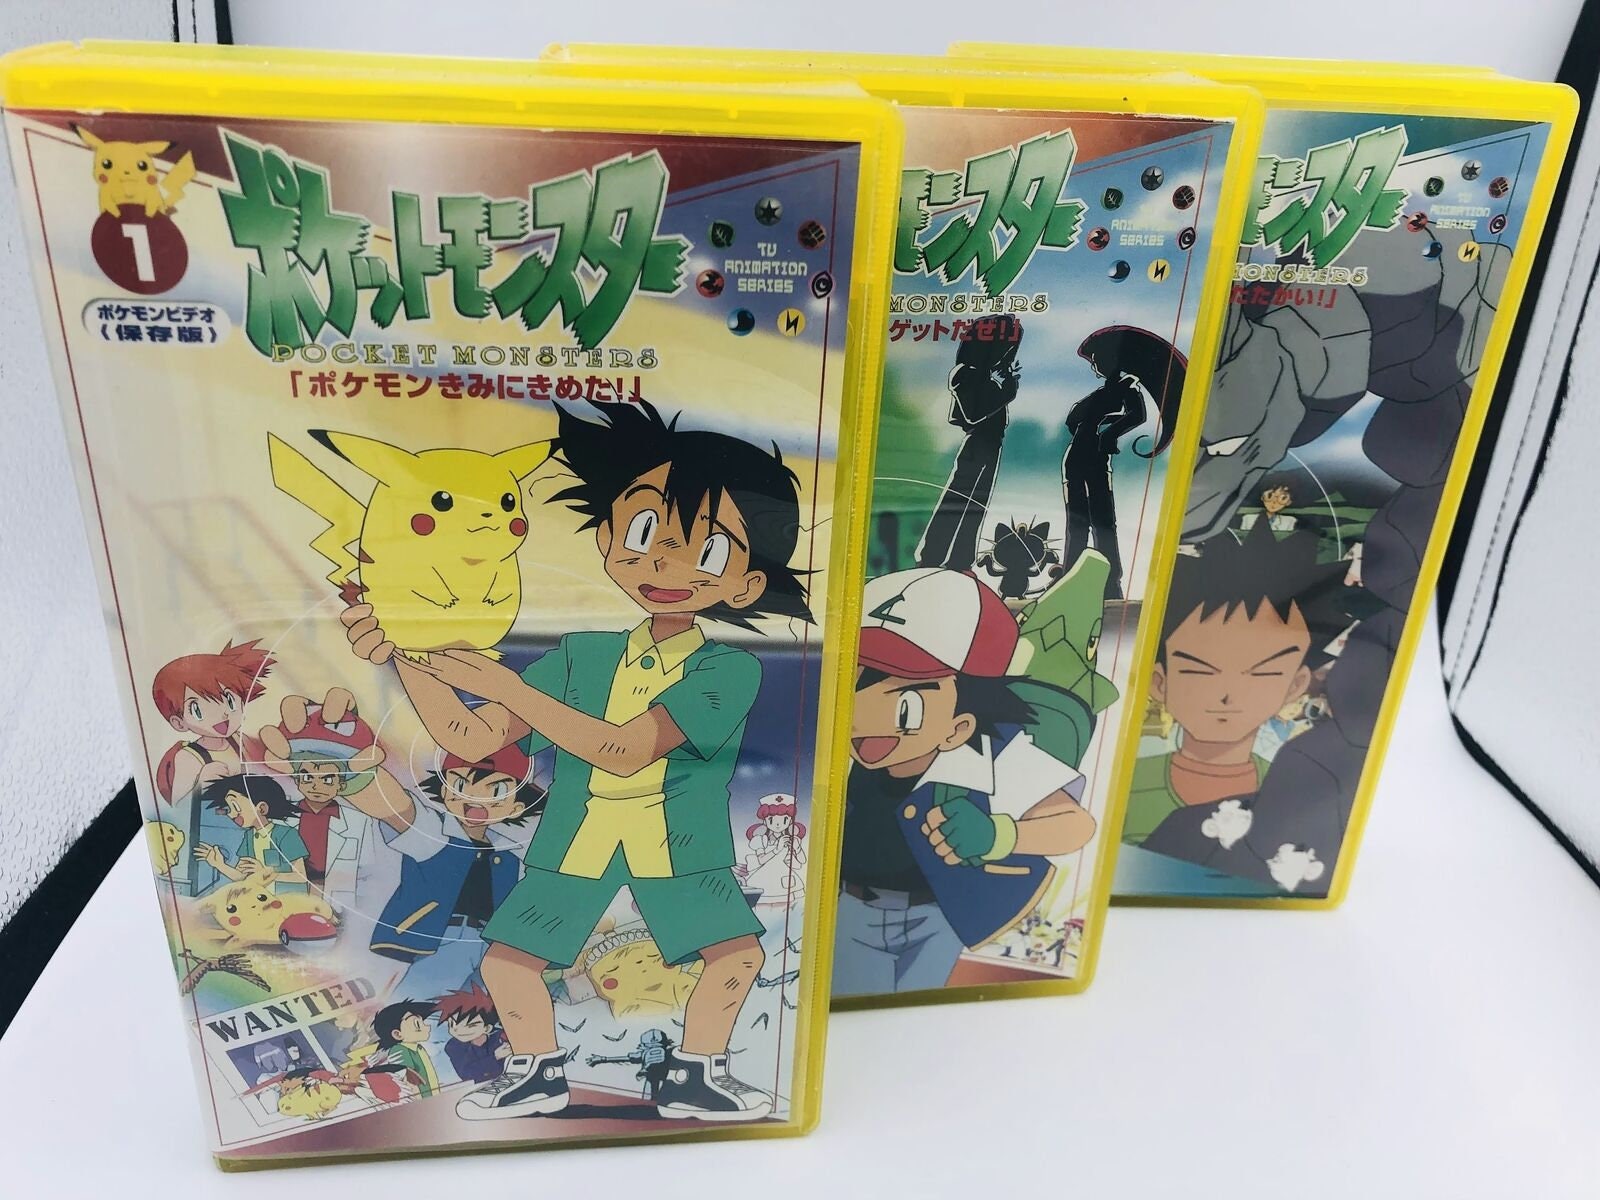 Pokémon the Movie 2000 (VHS, 2000, Clamshell) for sale online